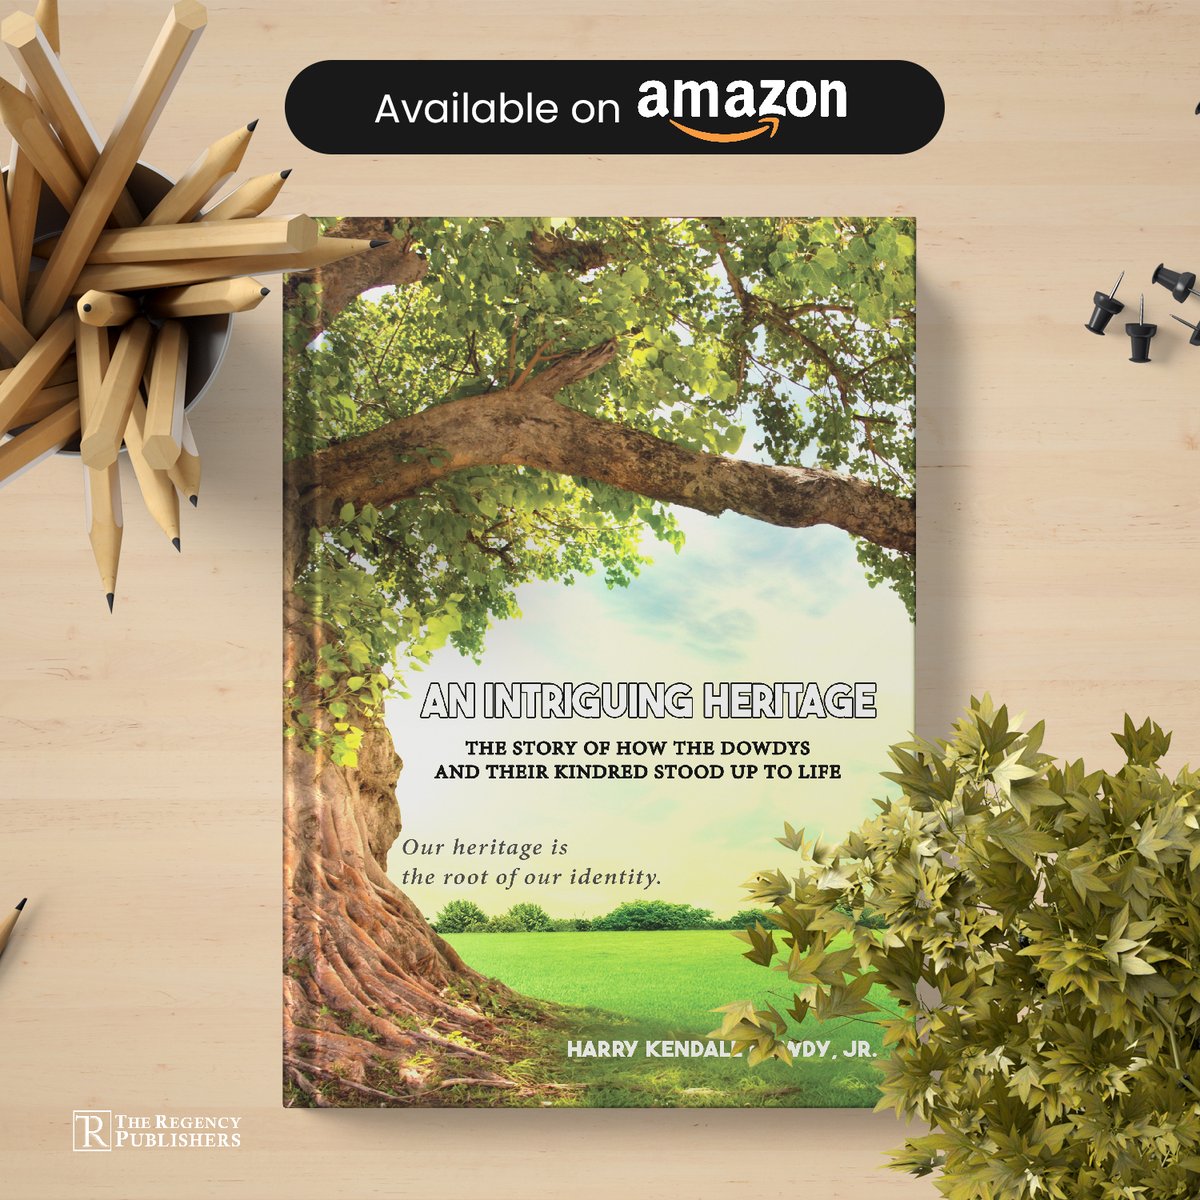 Explore Harry Kendall Dowdy's 'An Intriguing Heritage' through historical anecdotes and personal narratives.

Soon available on Amazon!

#TheRegencyPublishers #HarryKendallDowdy
#FamilyHistory #BookRecommendation #BookSuggestion
#AnIntriguingHeritage #BookPromotion